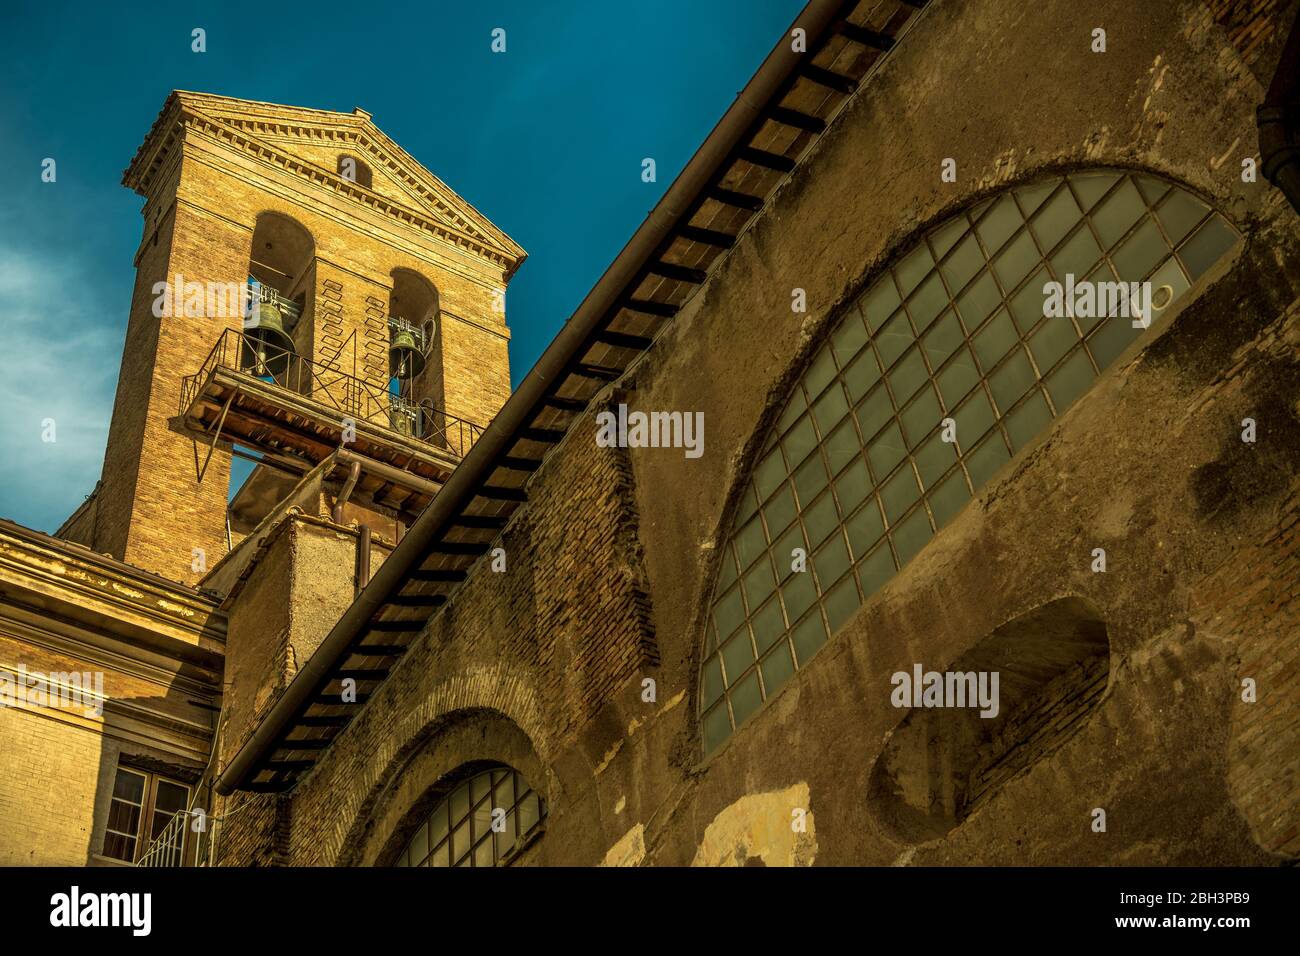 Church Bells On Top of Tall Tower In Historical Building In Rome. Stock Photo